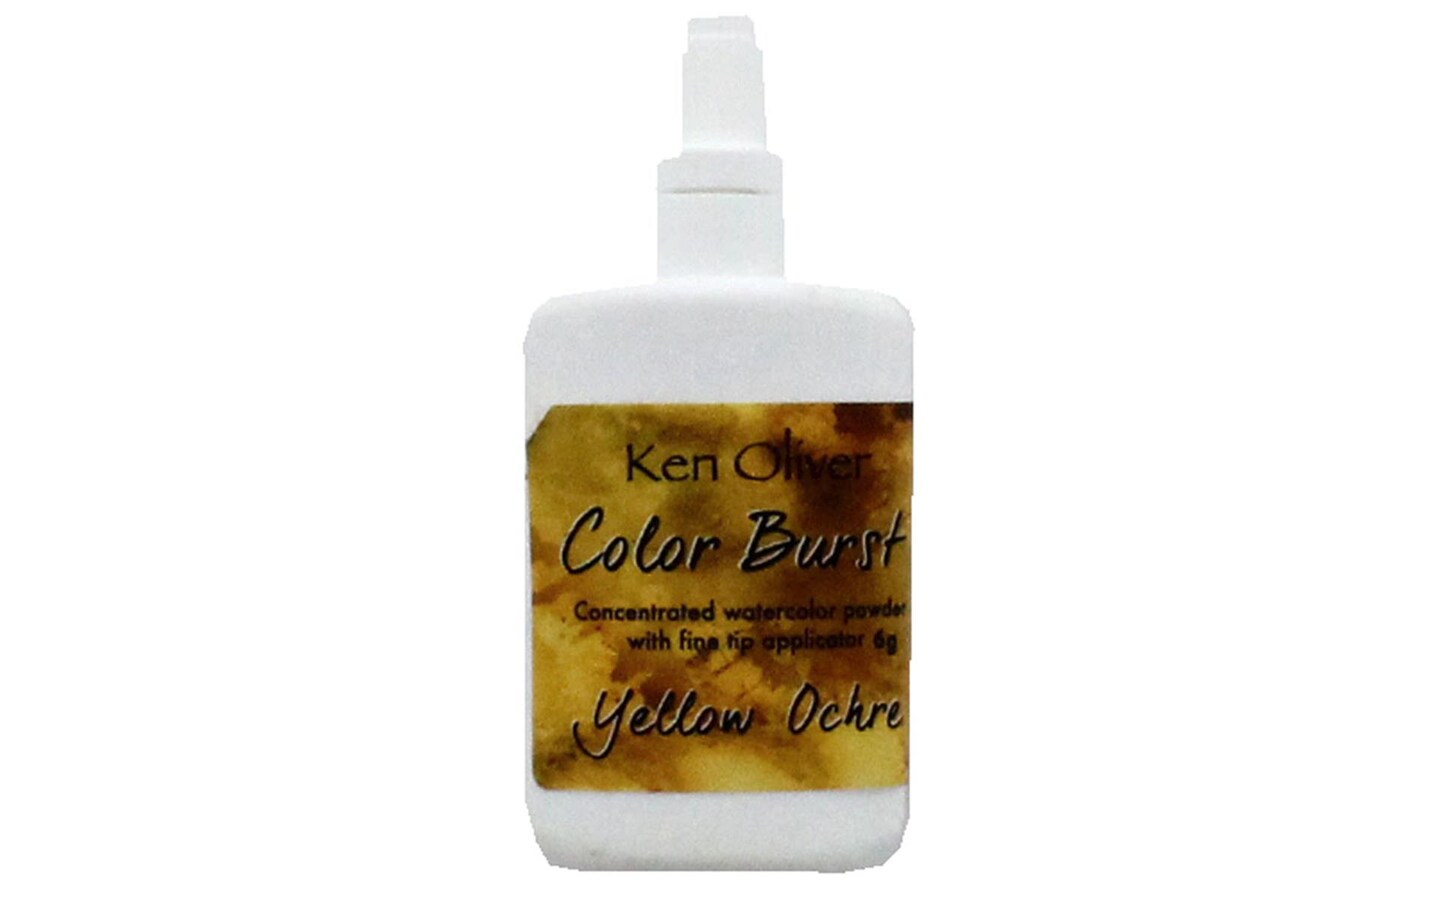 Contact Crafts KOliver Color Burst 6g Yellow Ochre